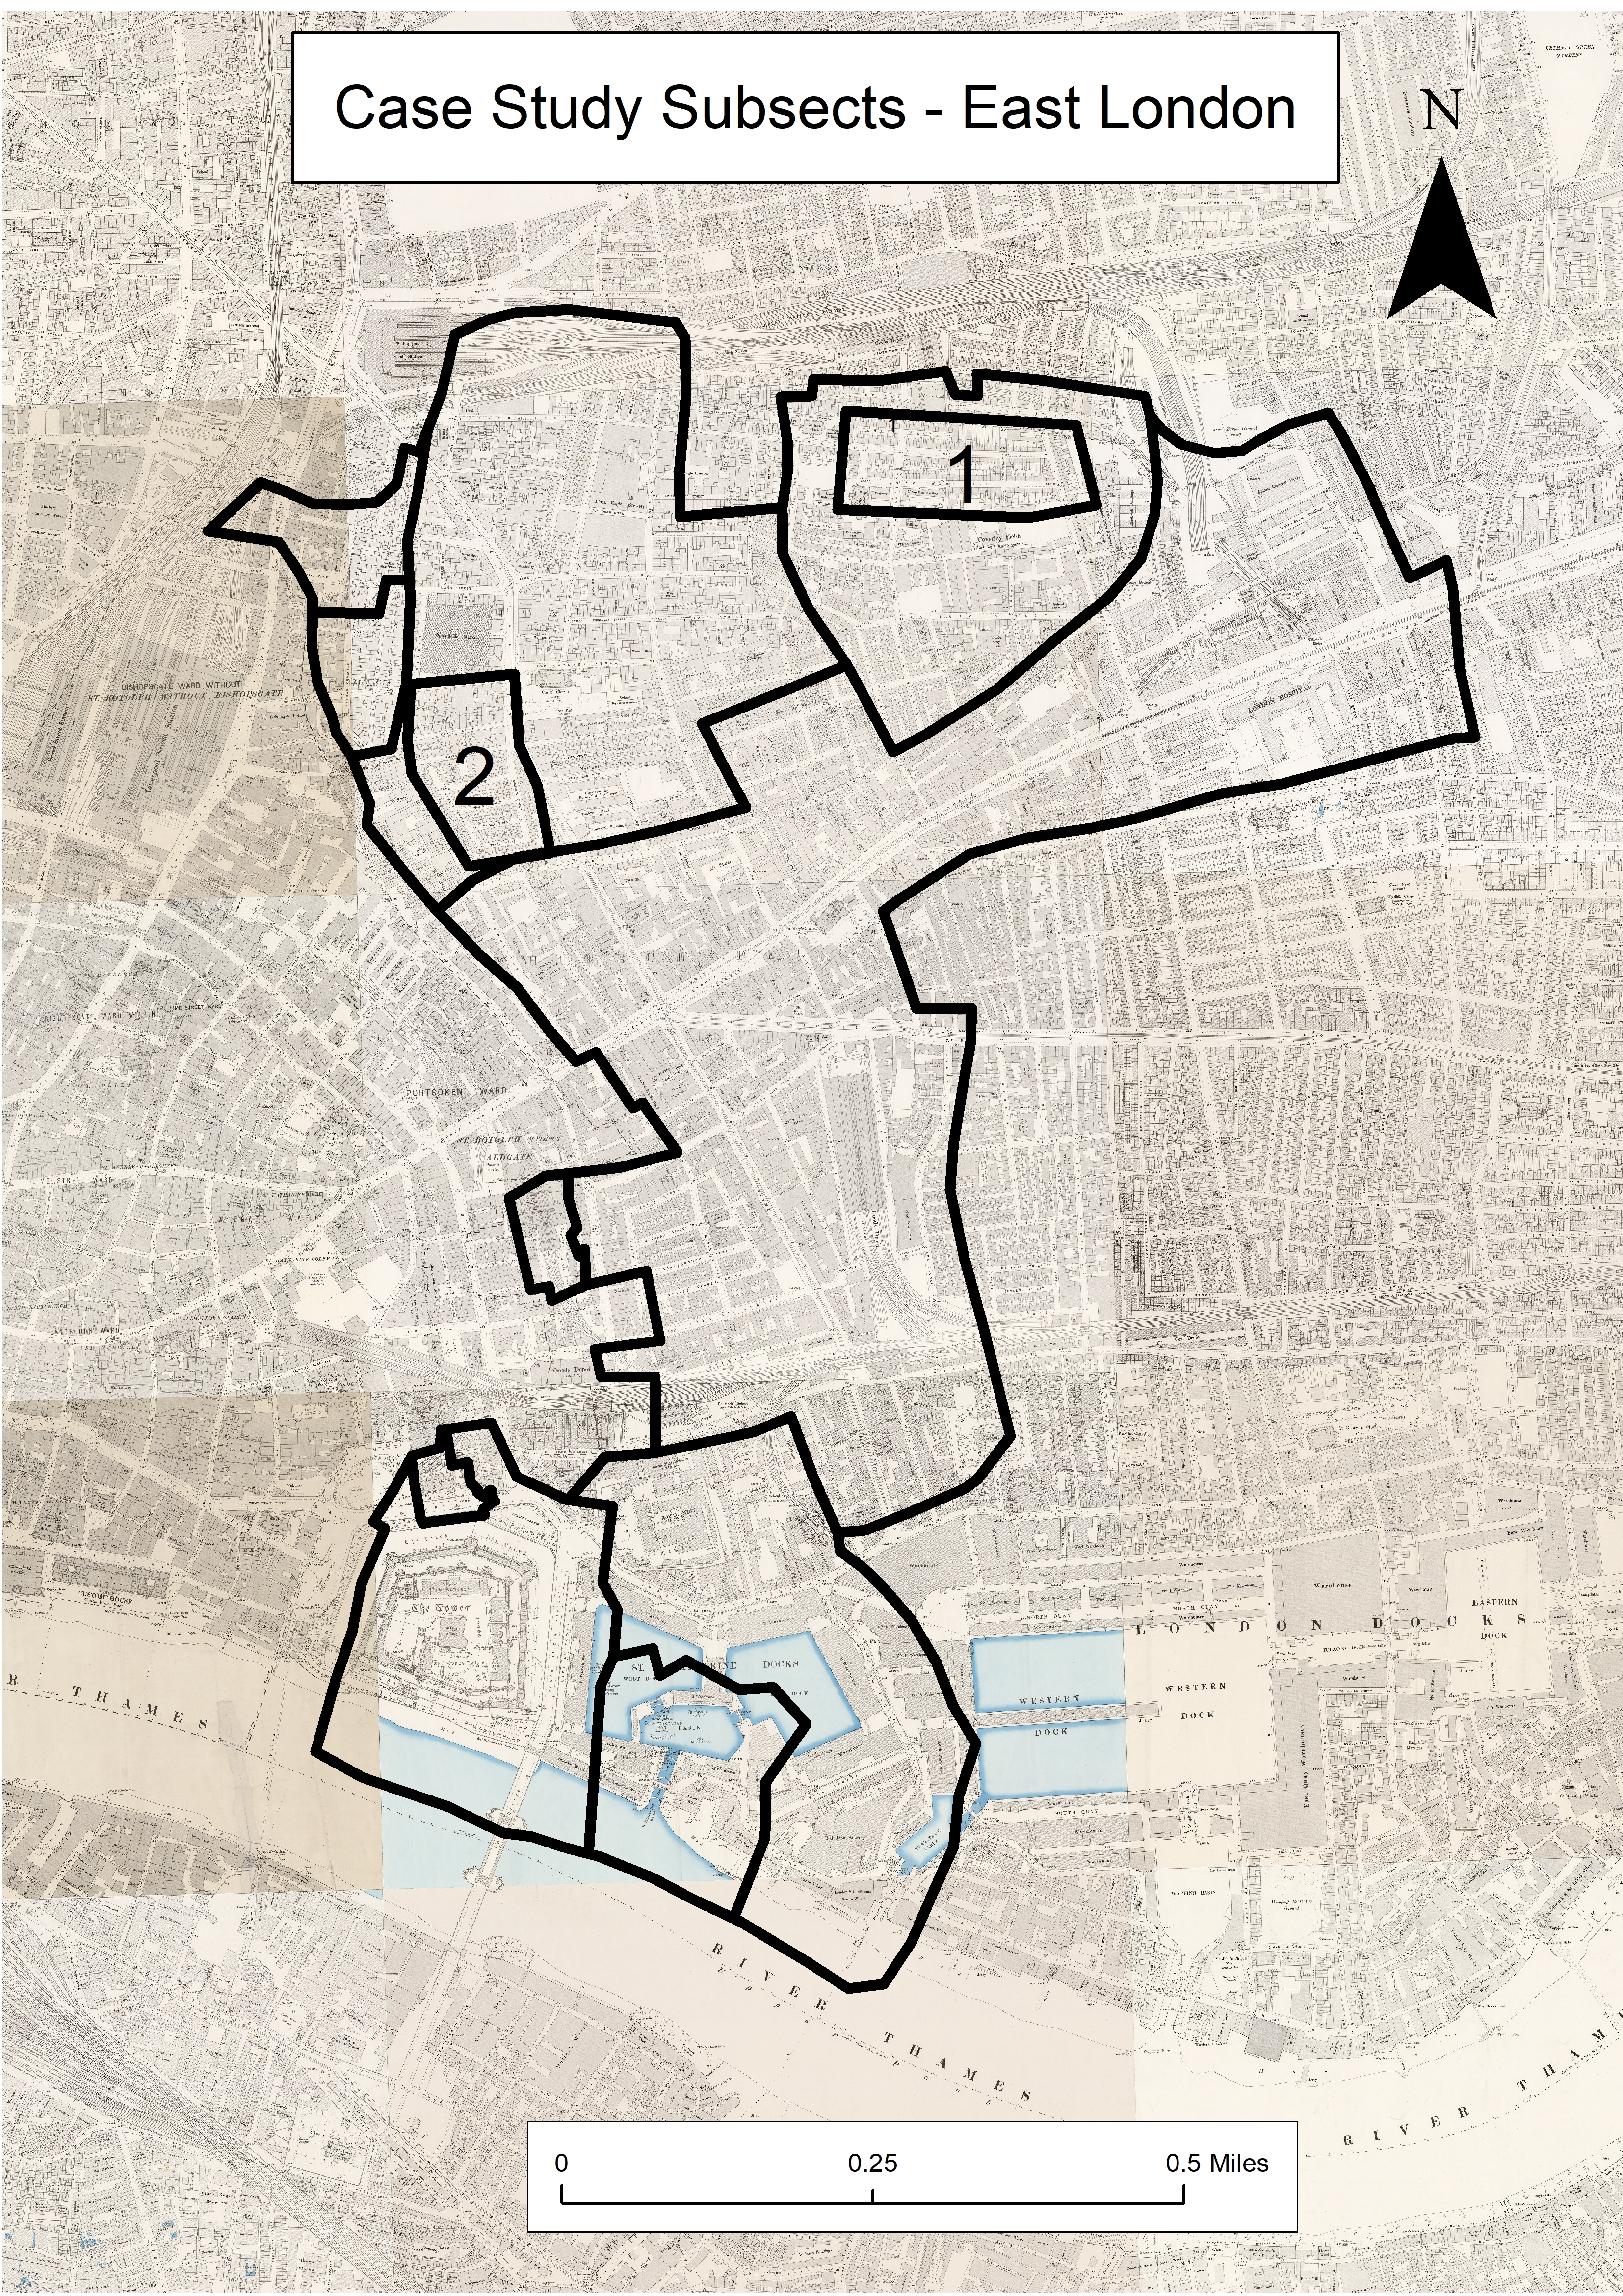 A map of East London with an overlay showing subsect one and subsect two